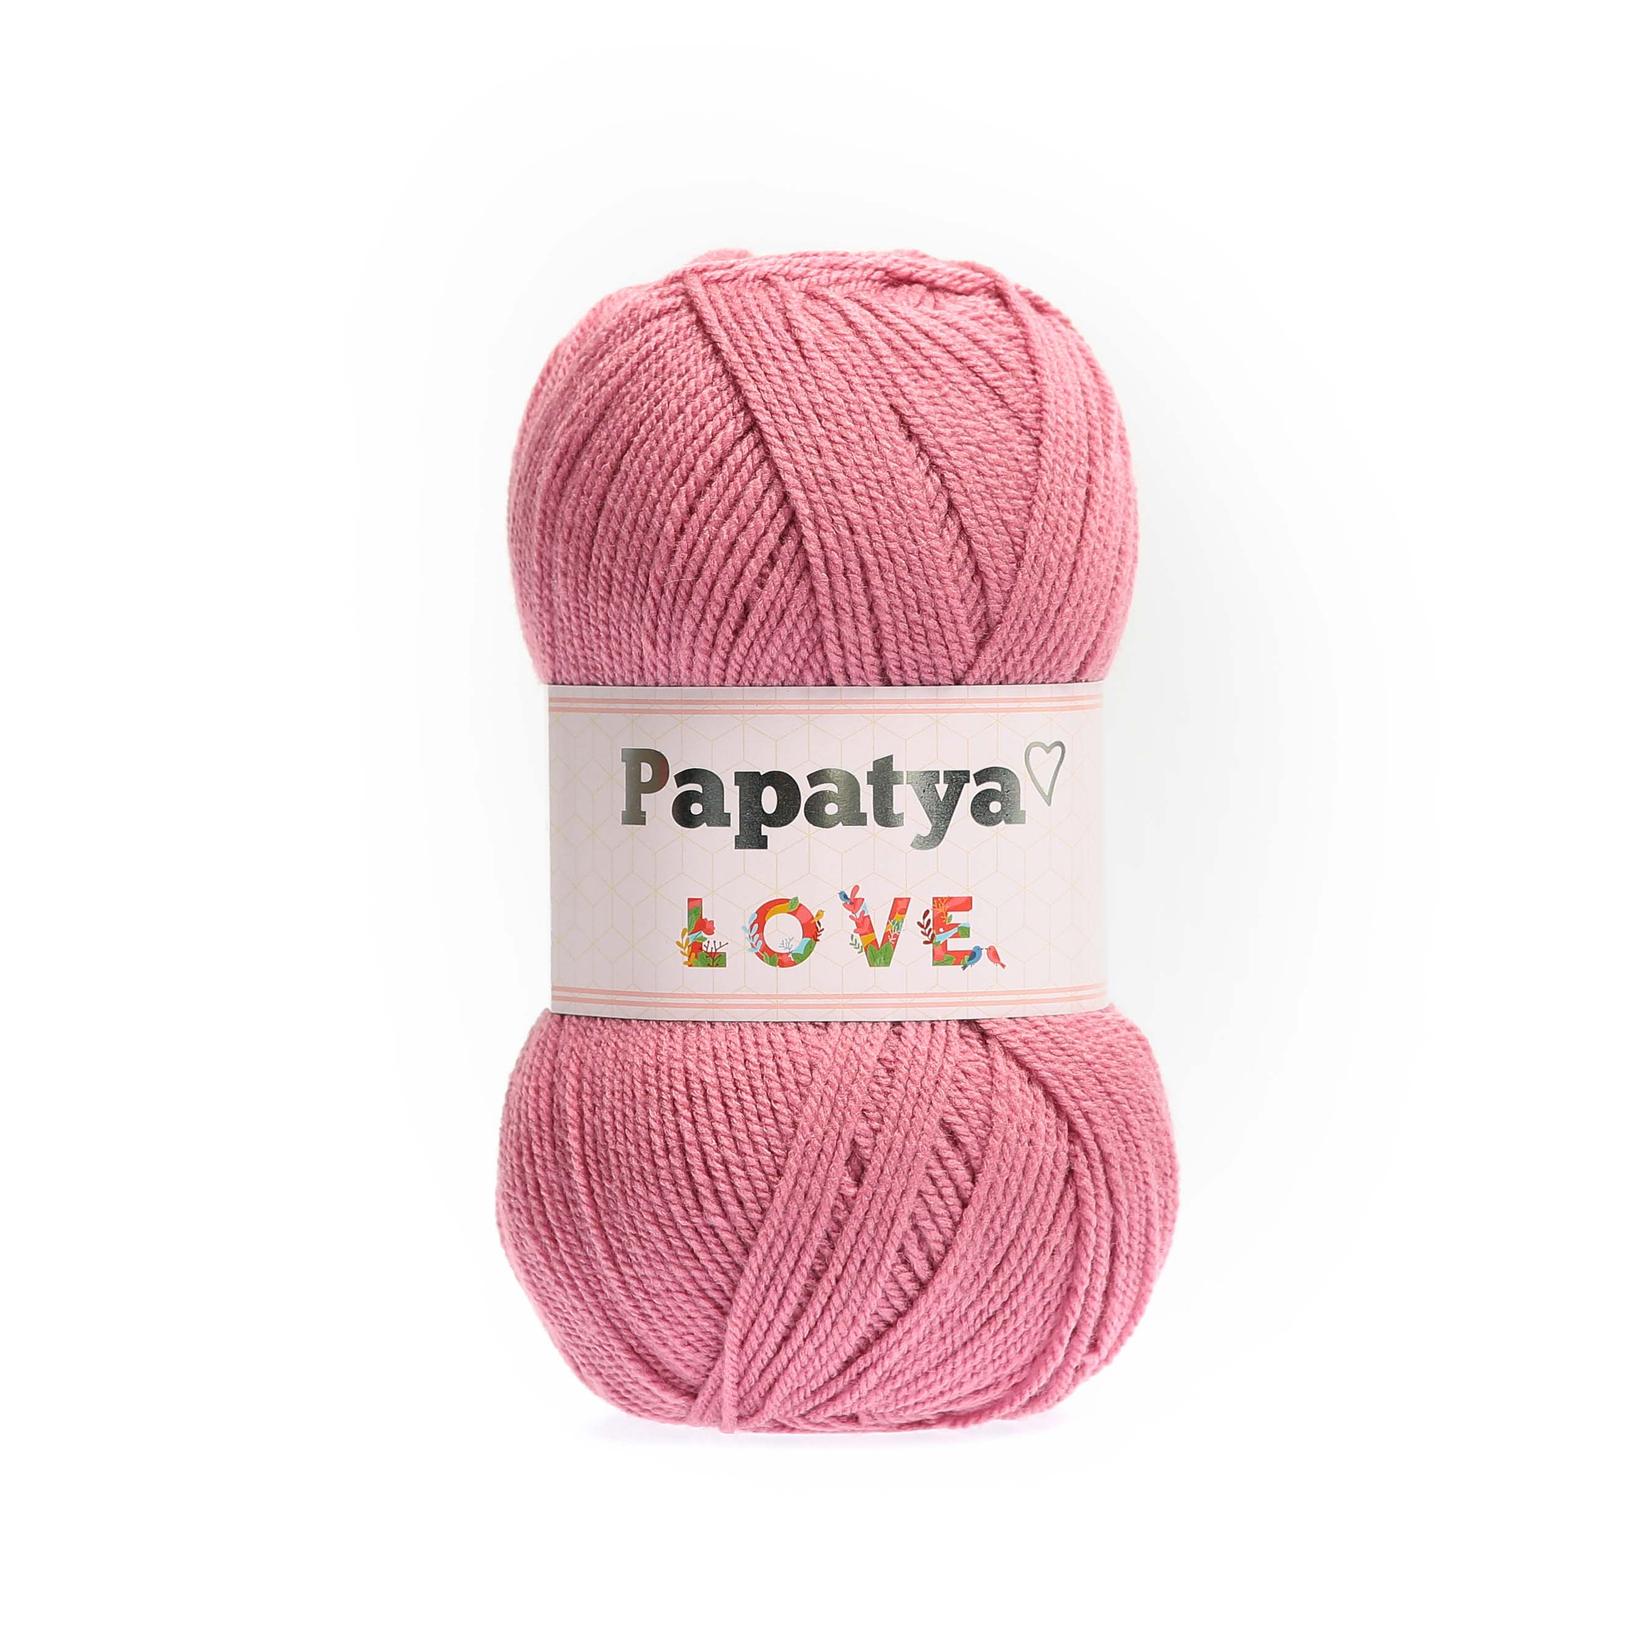 Selected image for PAPATYA Vunica Love 3570